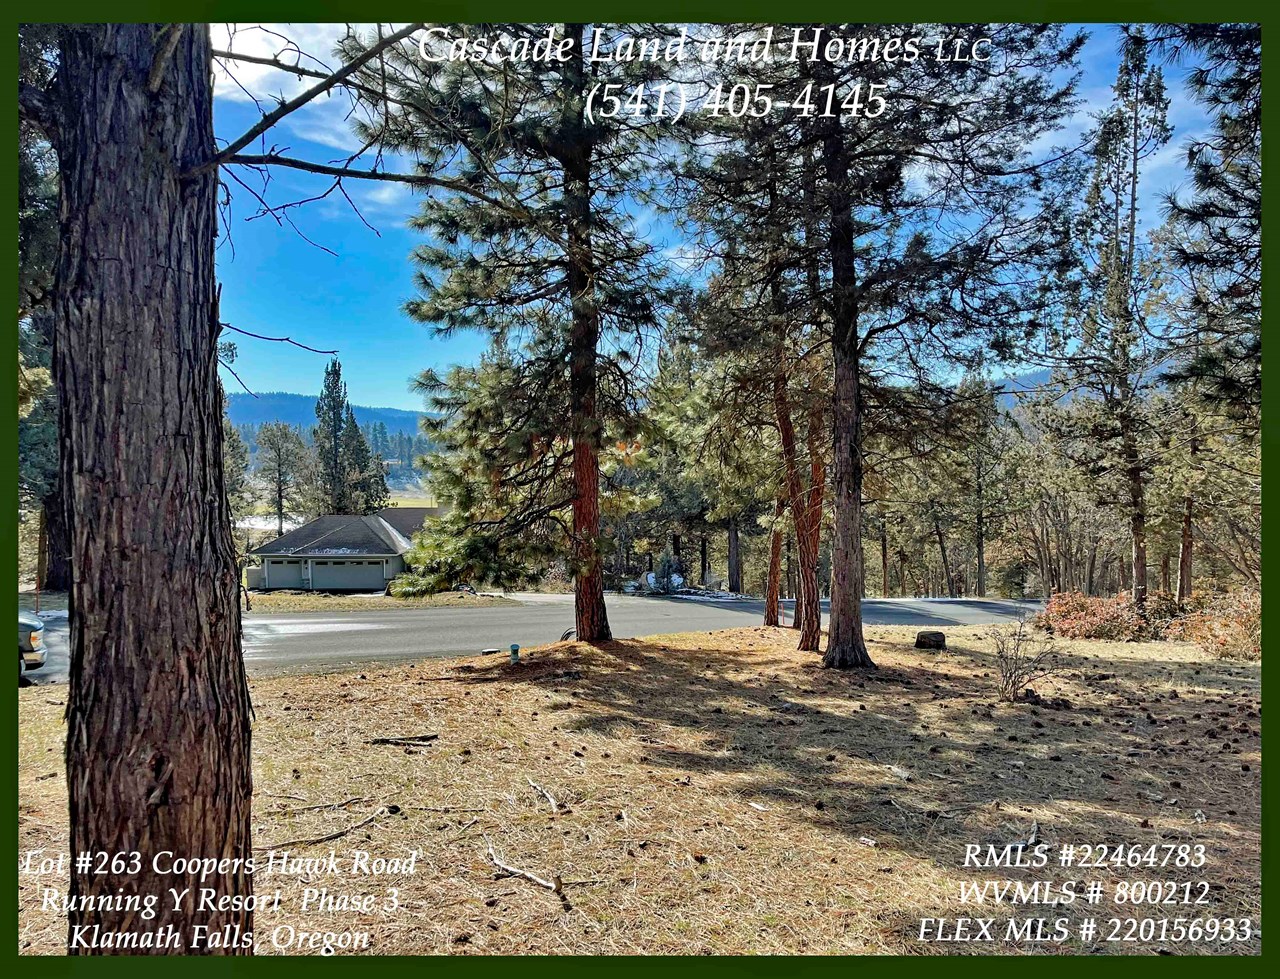 looking across the street from the property towards the golf course and the surrounding foothills. this gorgeous parcel is just over a half of an acre, allowing for many building possibilities! the property is priced at just $79,000, and is a rare opportunity to purchase property within the running y resort community! utilities are to the street, the property has many trees, a gentle slope, and is in an area of custom homes.